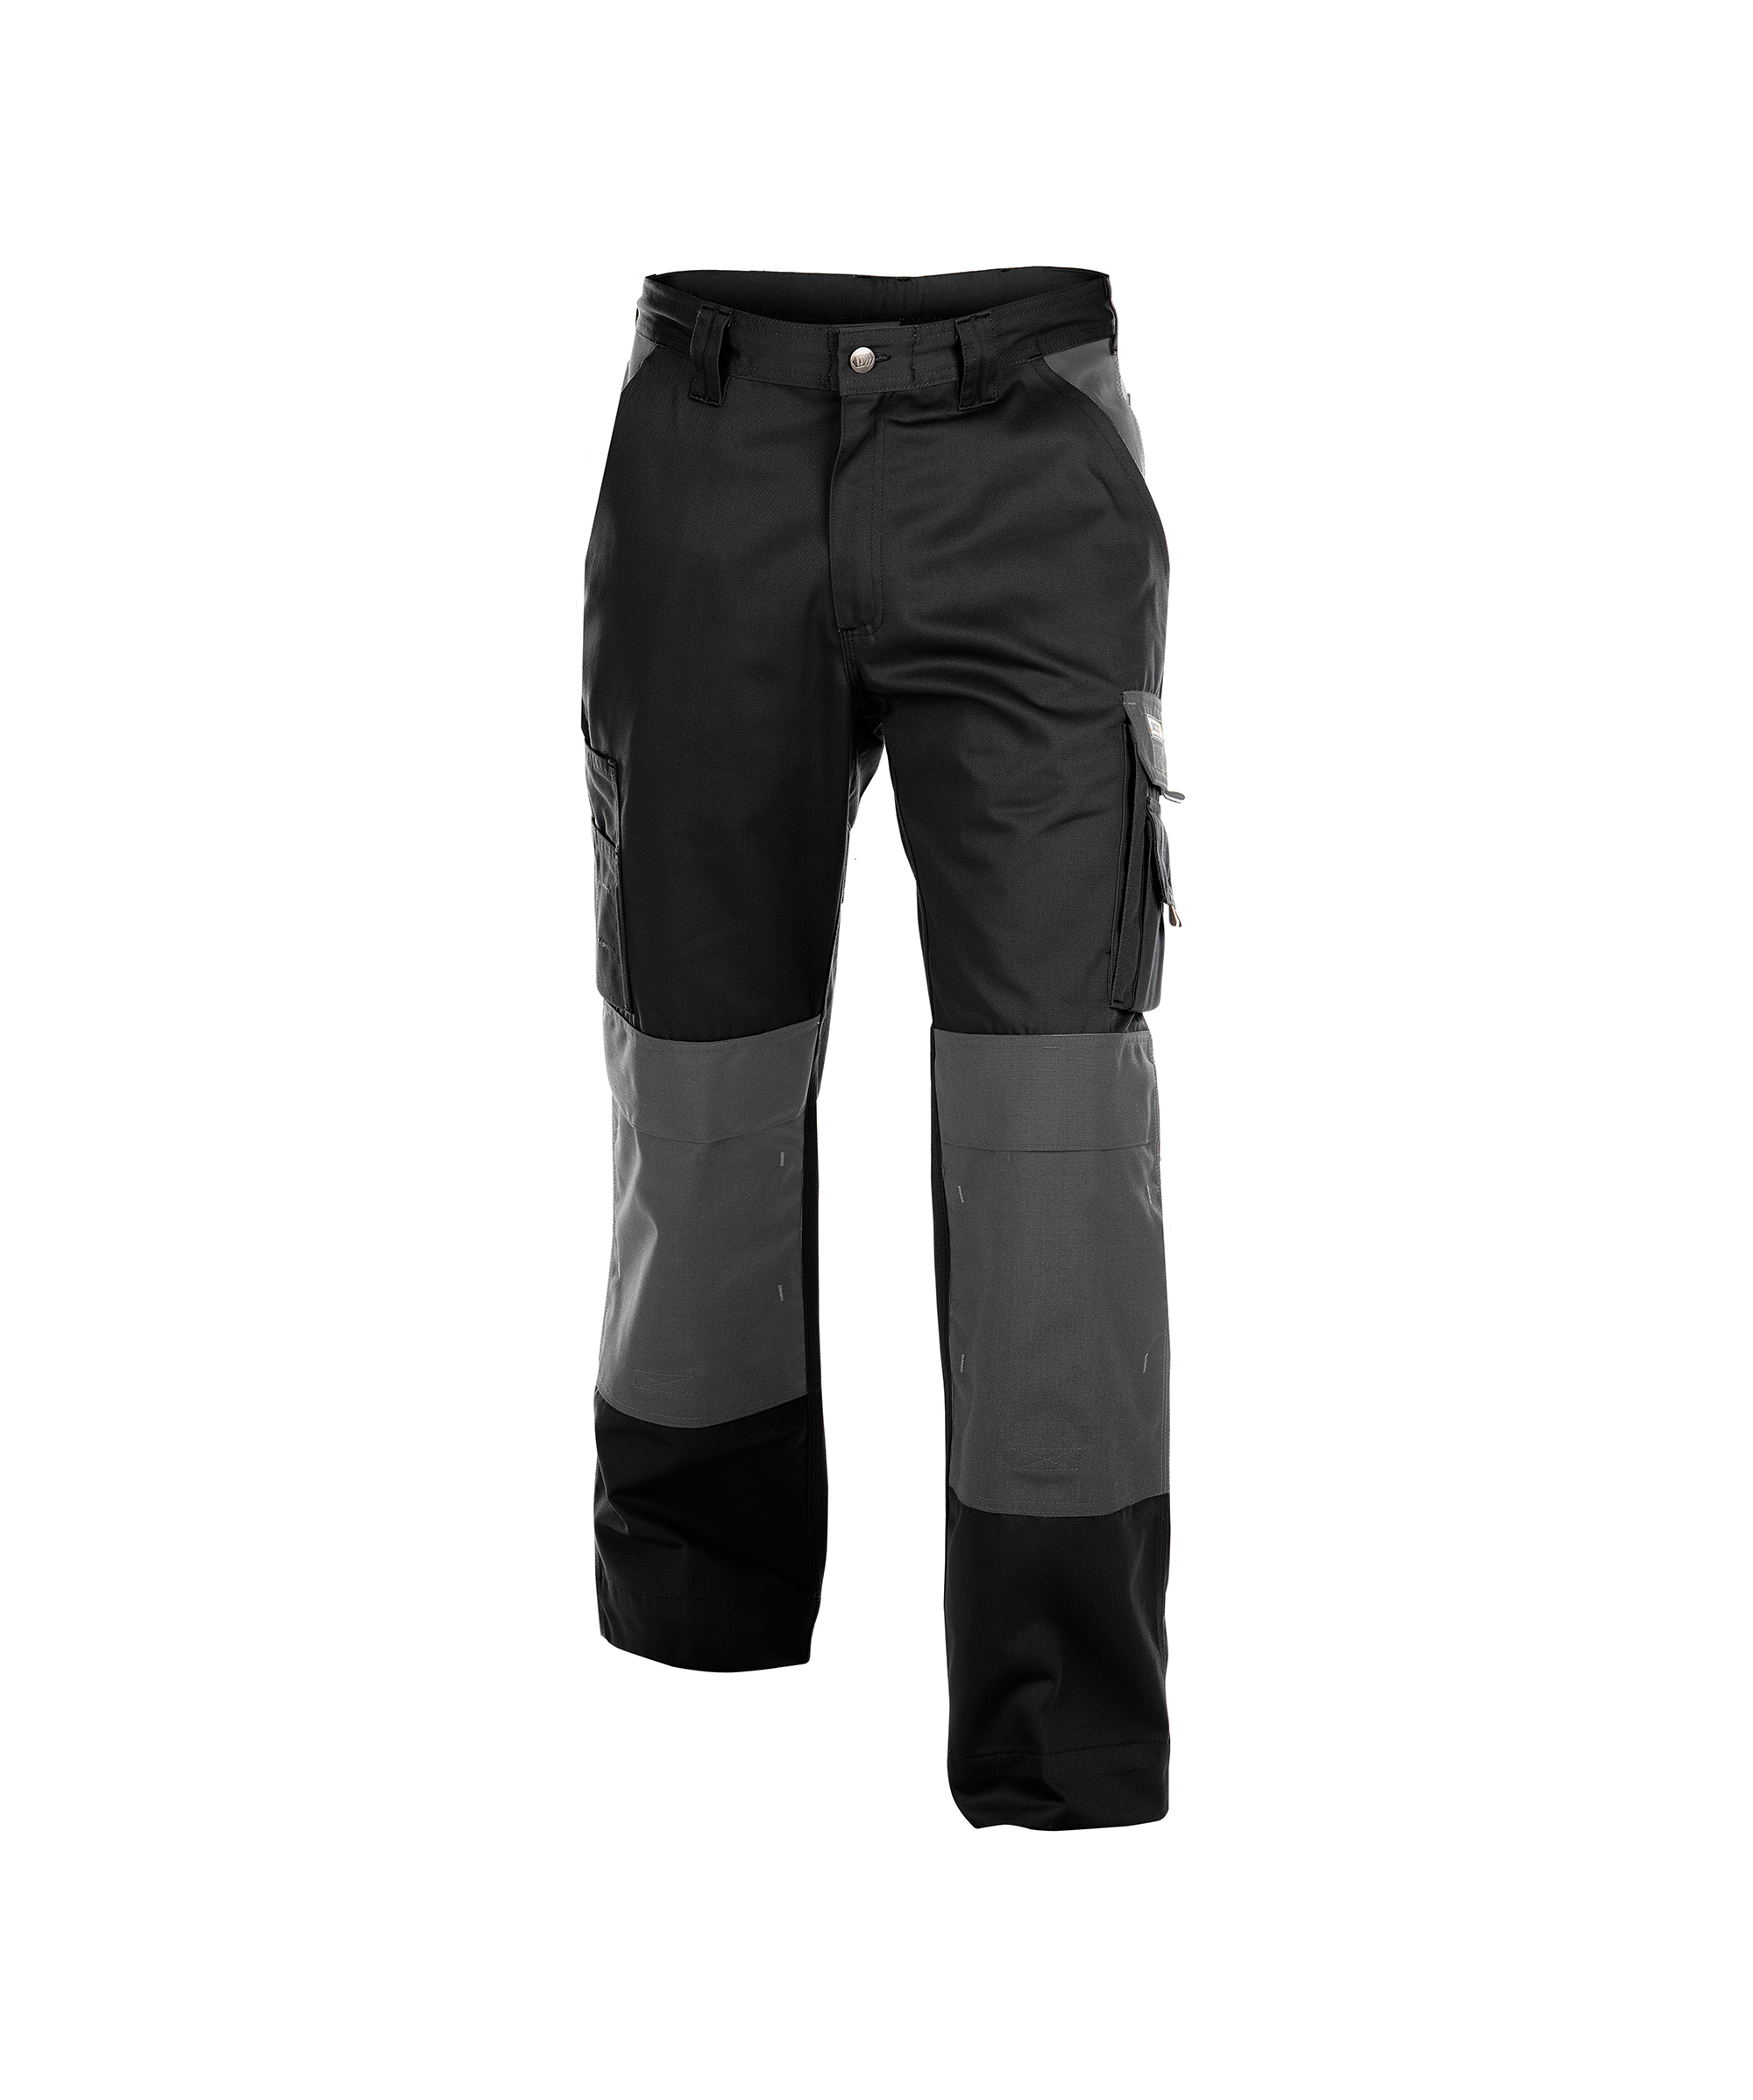 boston_two-tone-work-trousers-with-knee-pockets_black-cement-grey_front.jpg